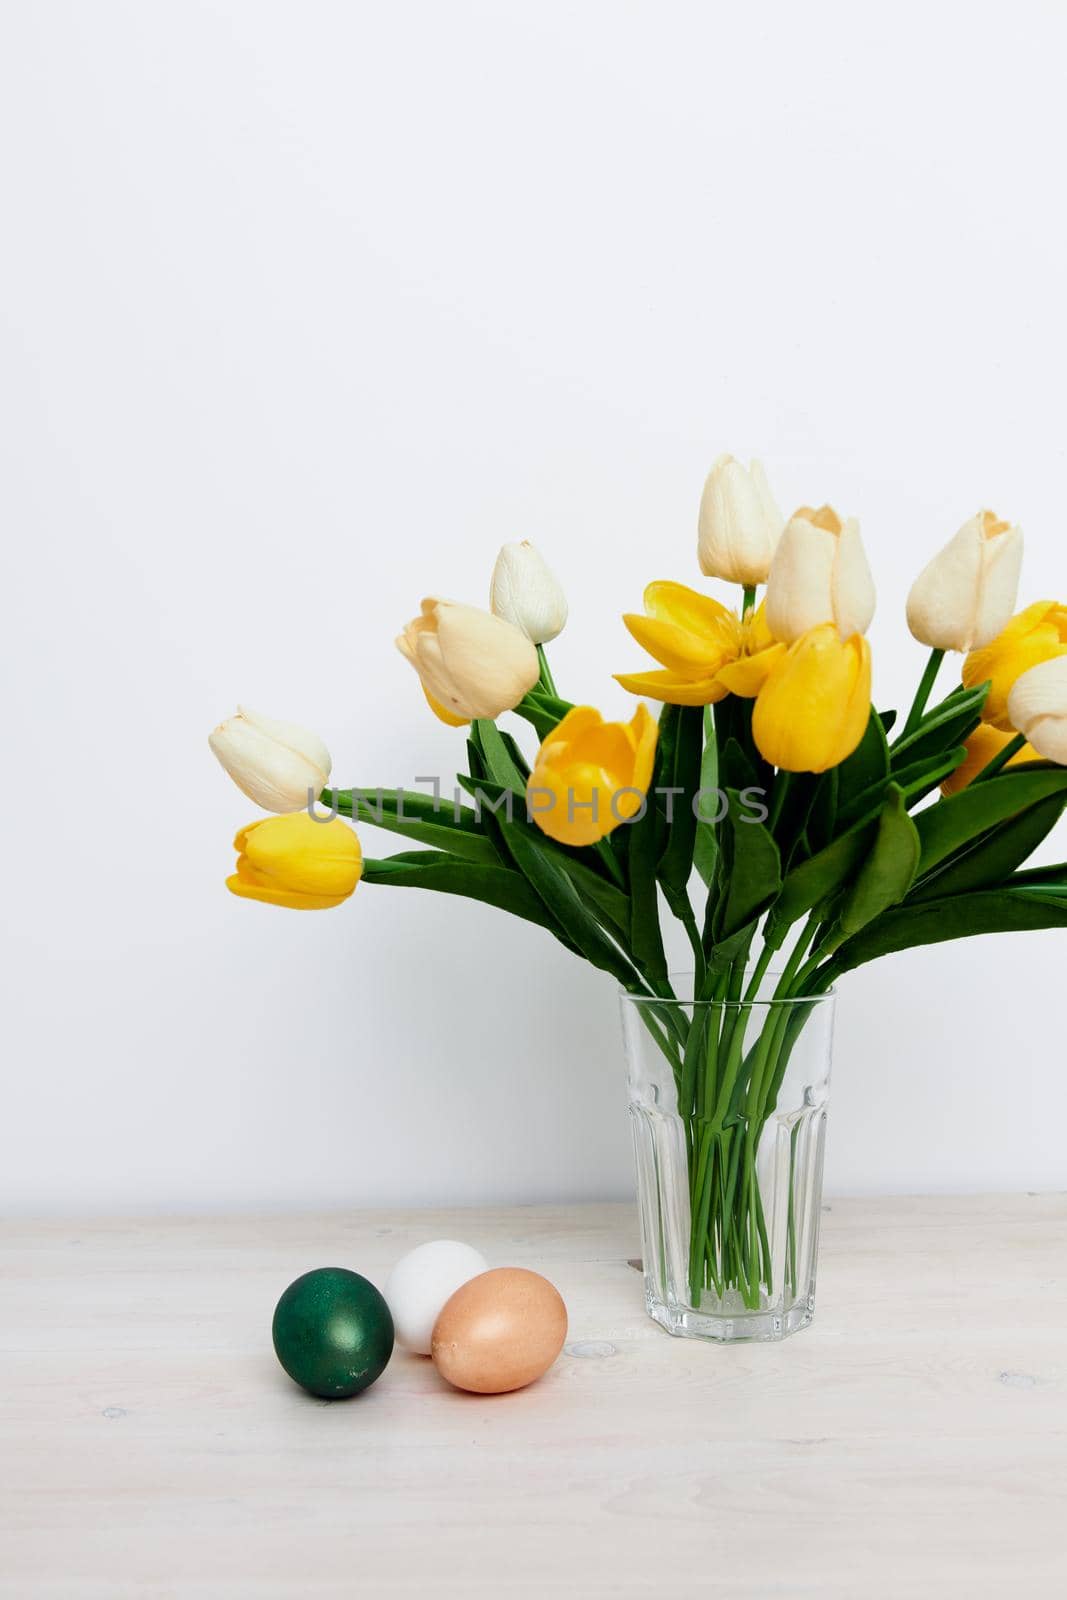 Easter eggs on the table and yellow tulips in a vase Copy Space. High quality photo